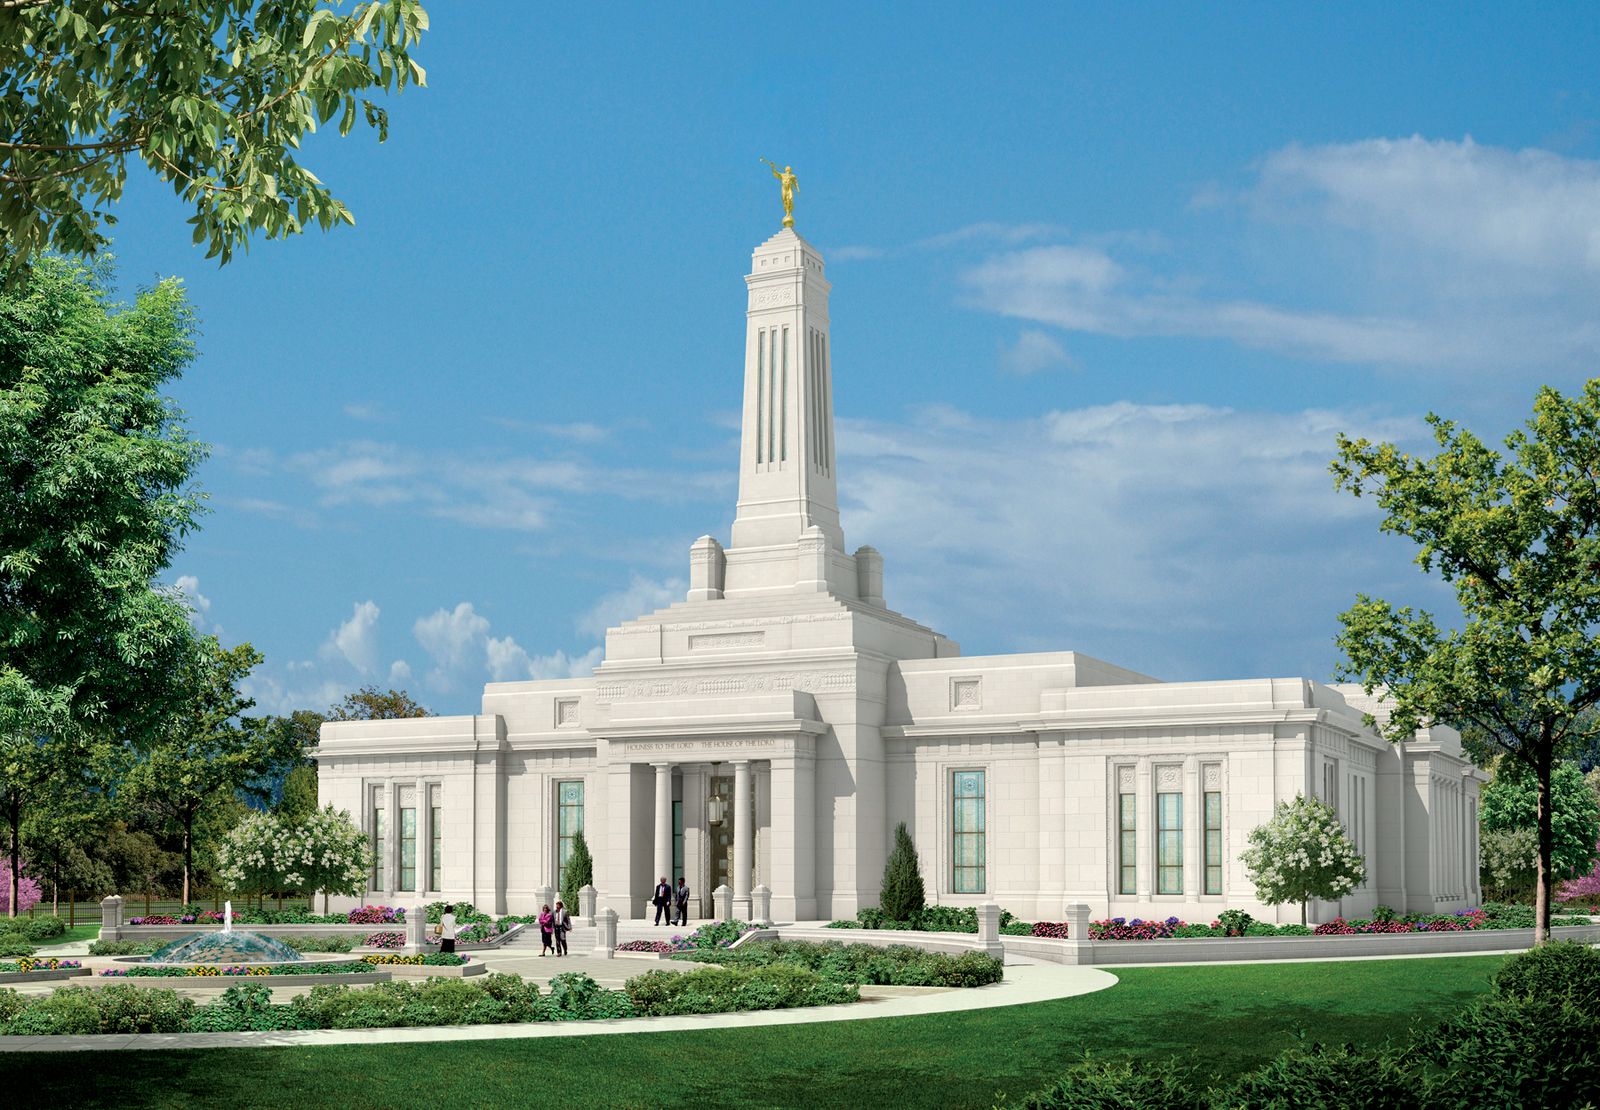 An artist’s rendering of the Indianapolis Indiana Temple.